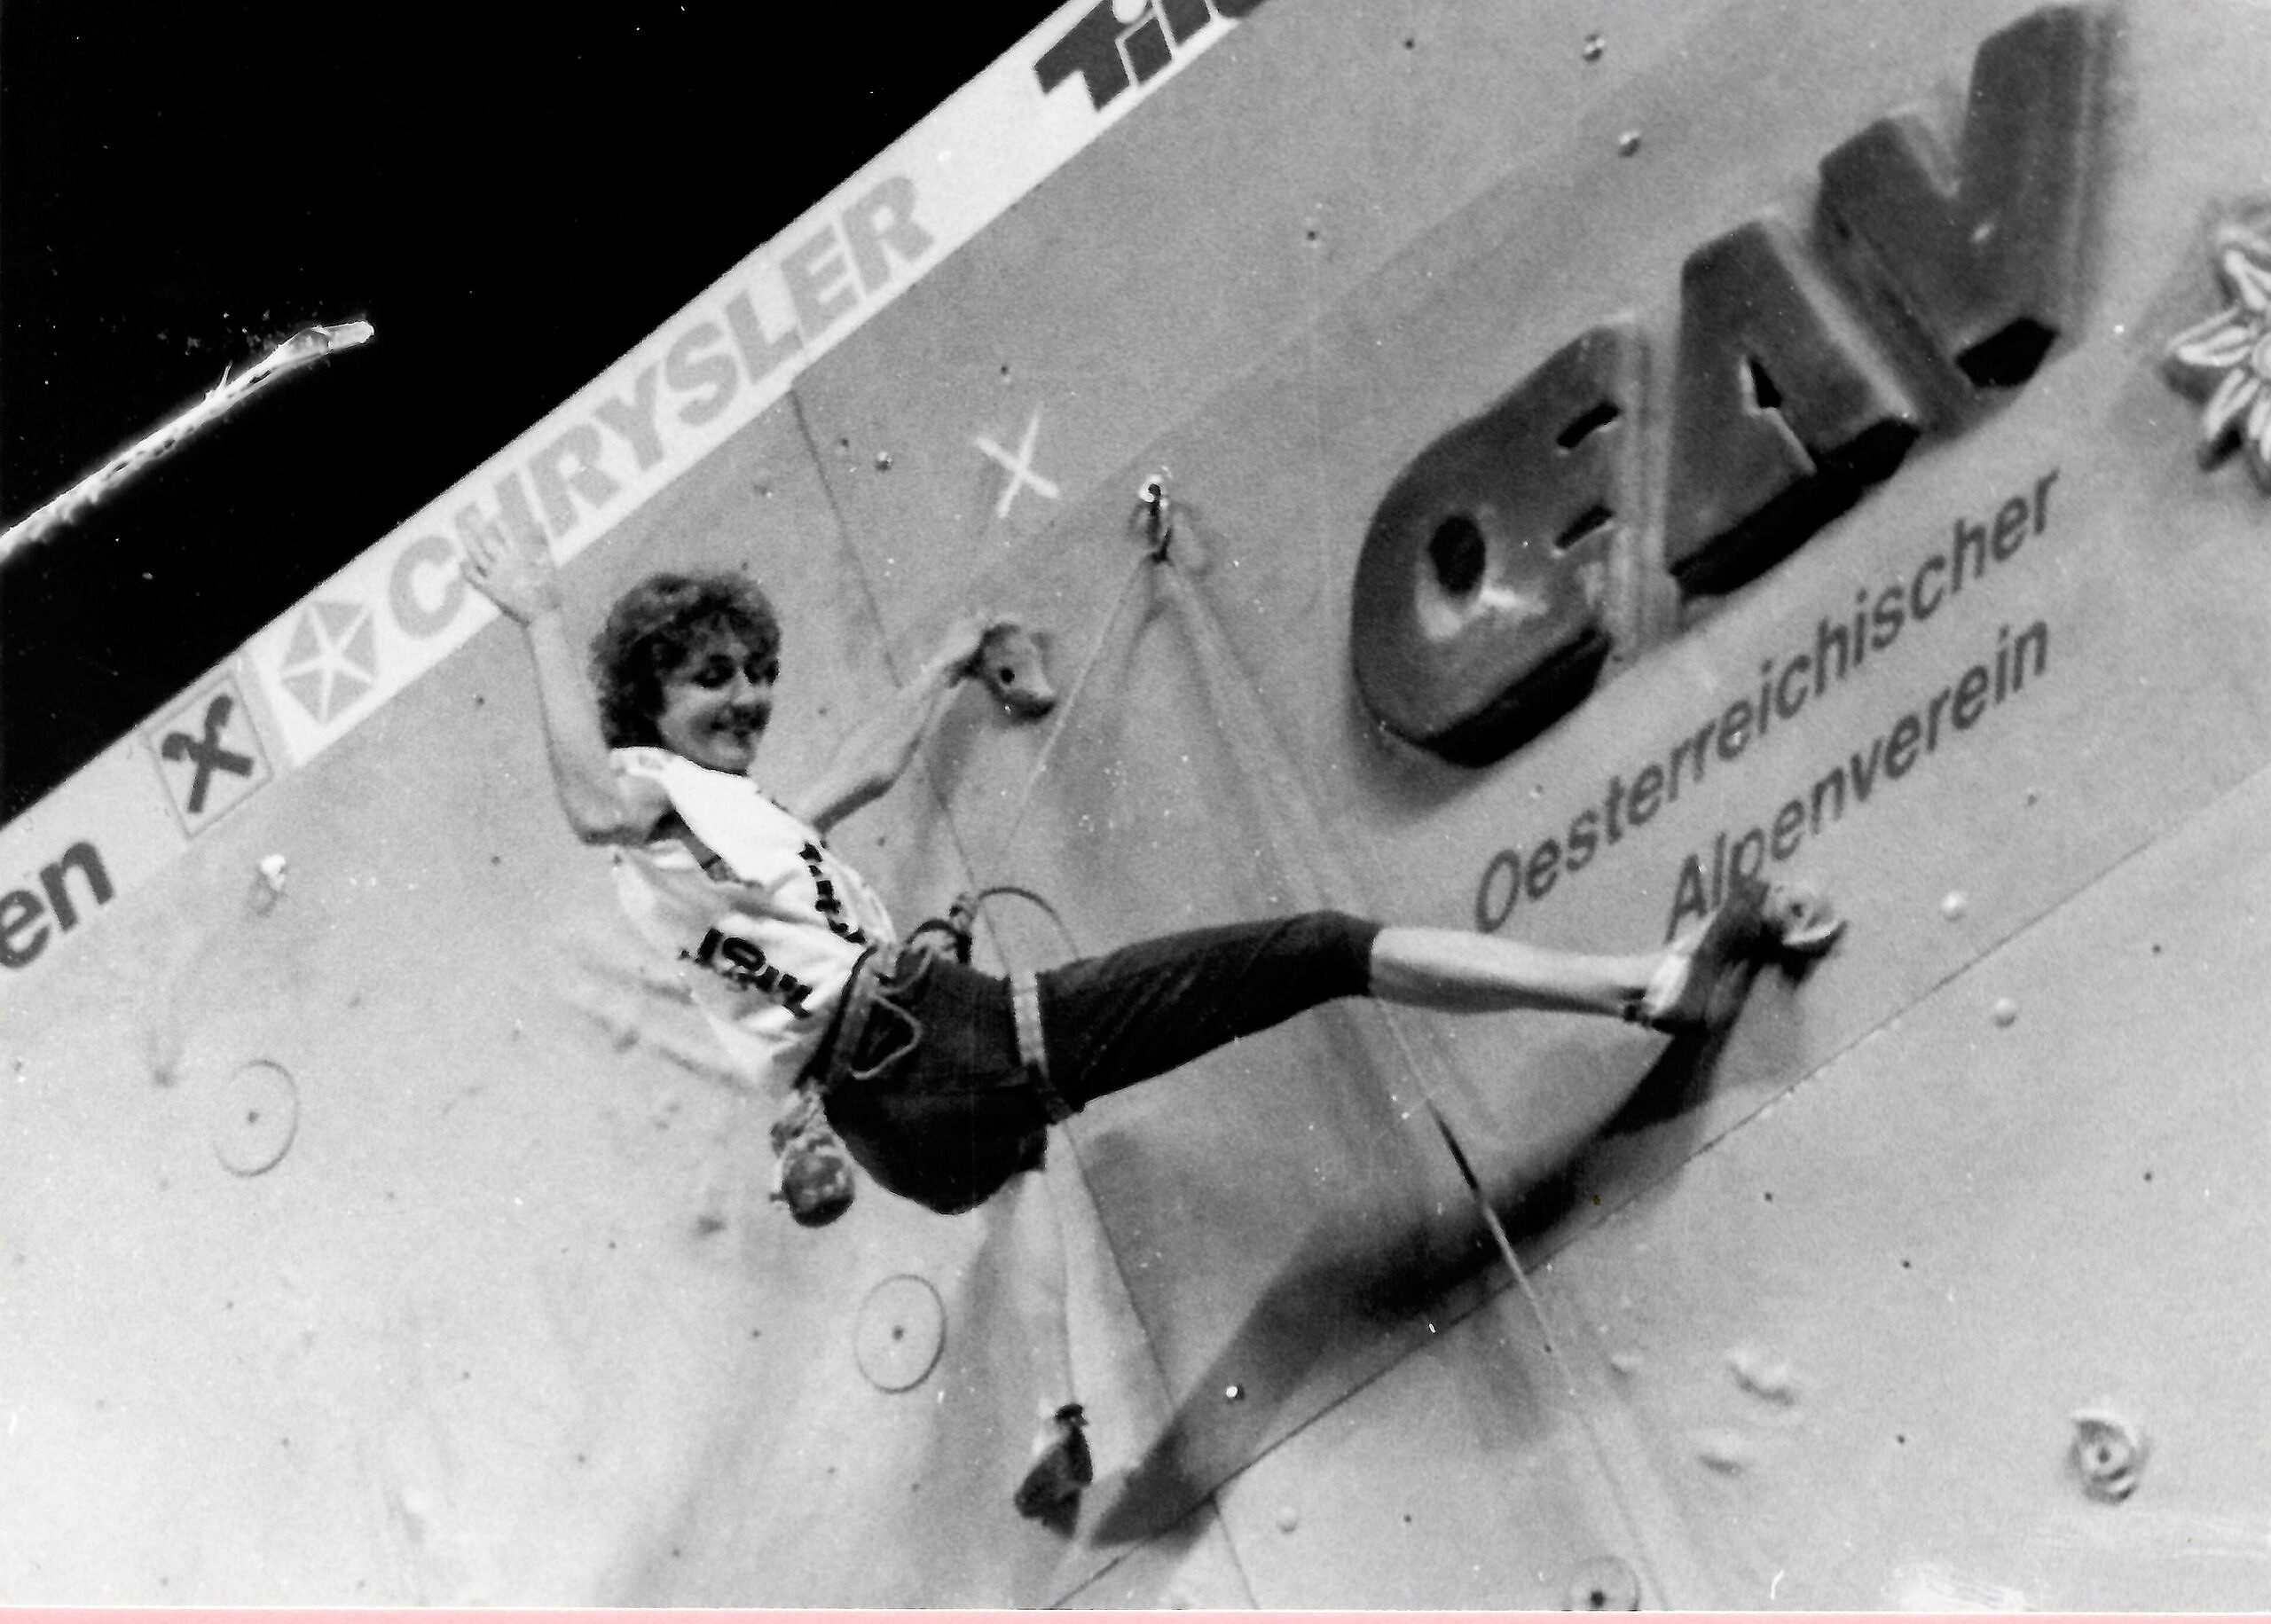 Susi Good tops a route at the World Championships in Innsbruck, Austria, in 1993.  © Max John, courtesy of Susi Good